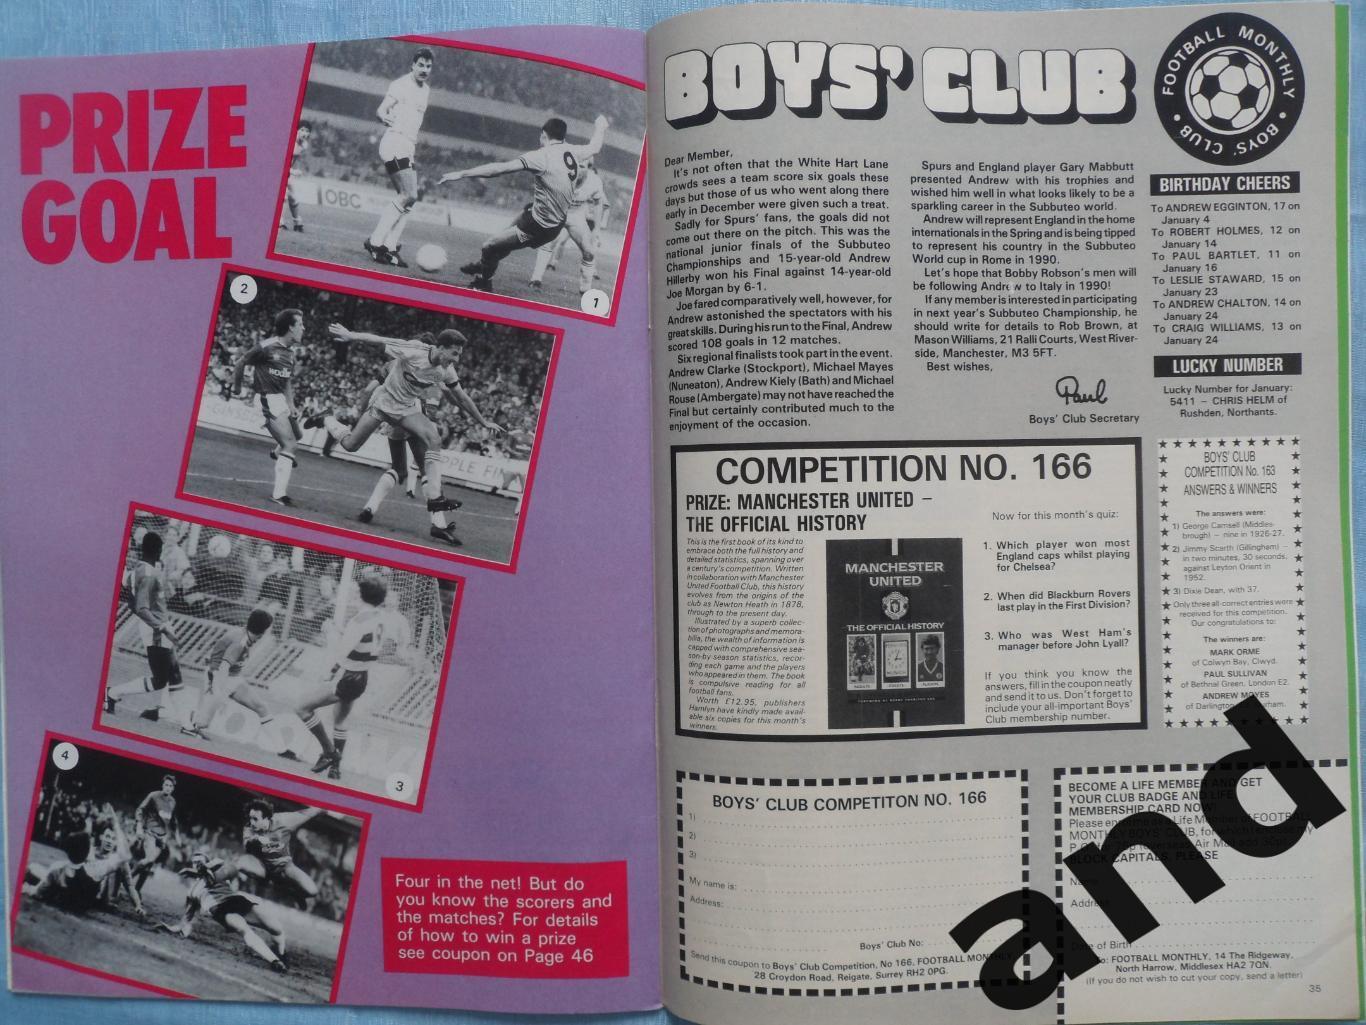 Football Monthly № 12 (1989) 7